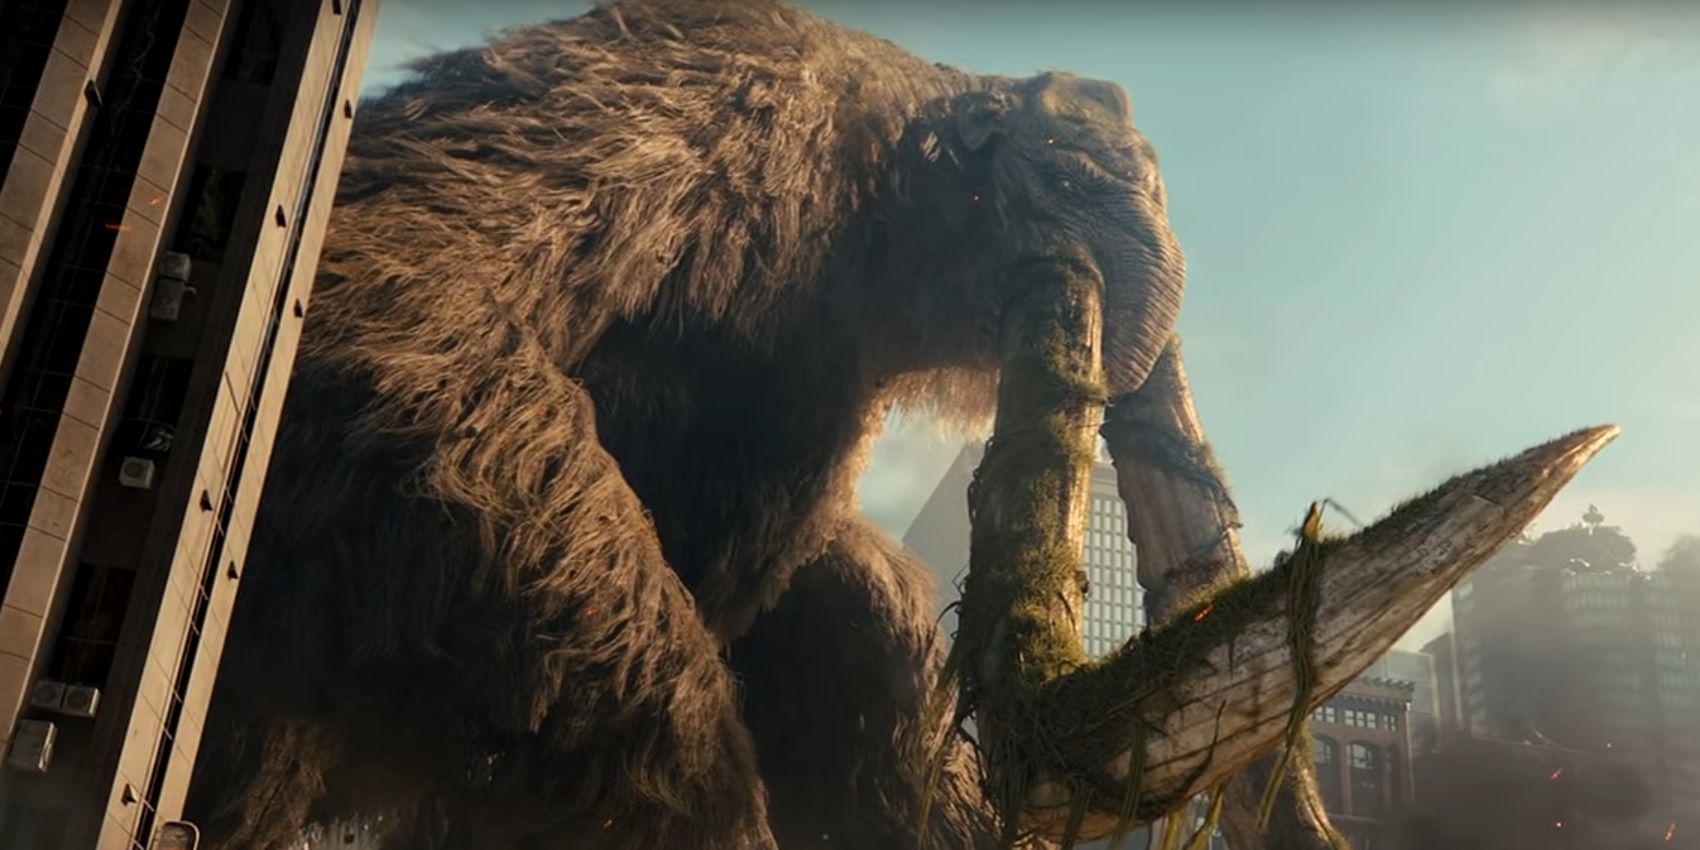 Behemoth is a new Titan in Godzilla: King of the Monsters